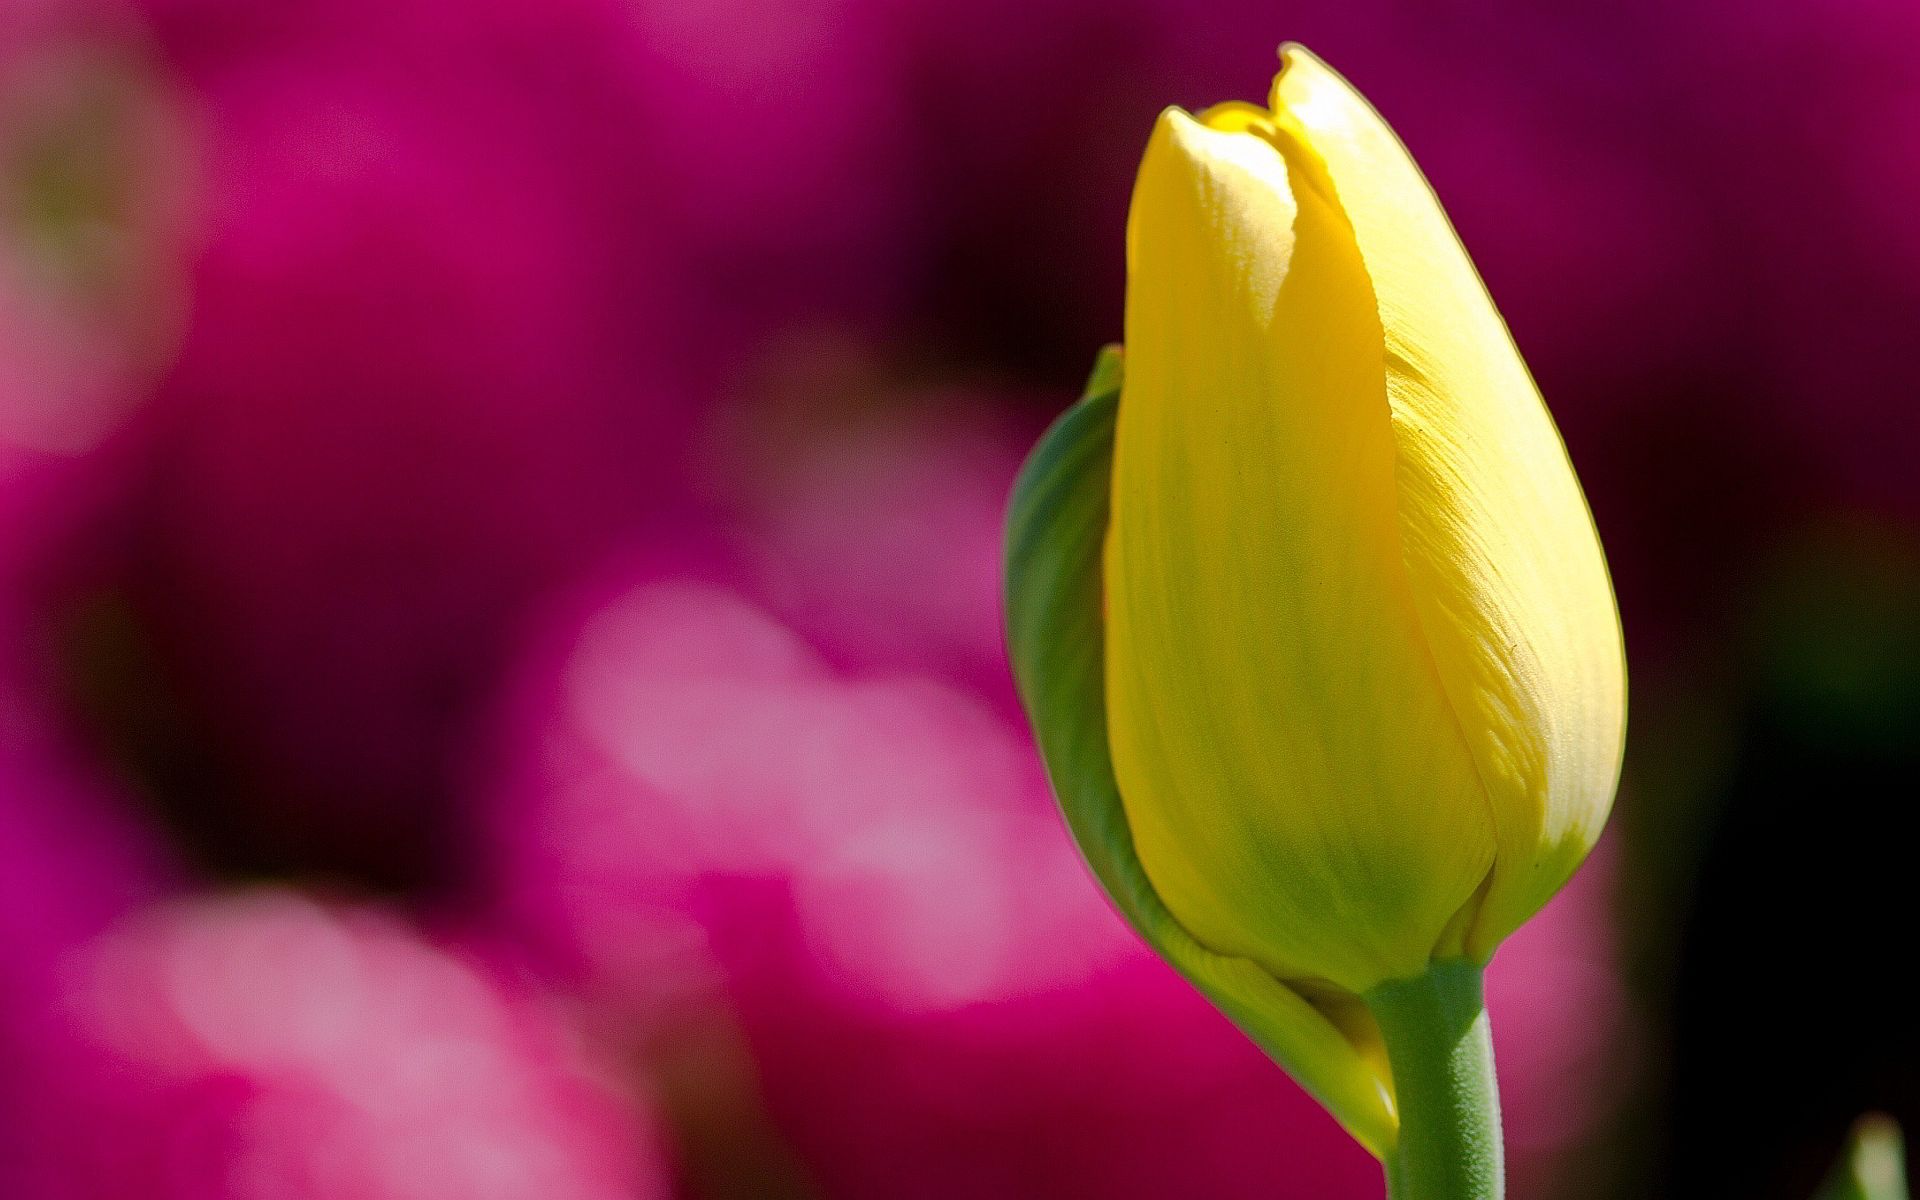 closed yellow tulip | Gardens And Flowers HD Wallpapers | Pinterest ...